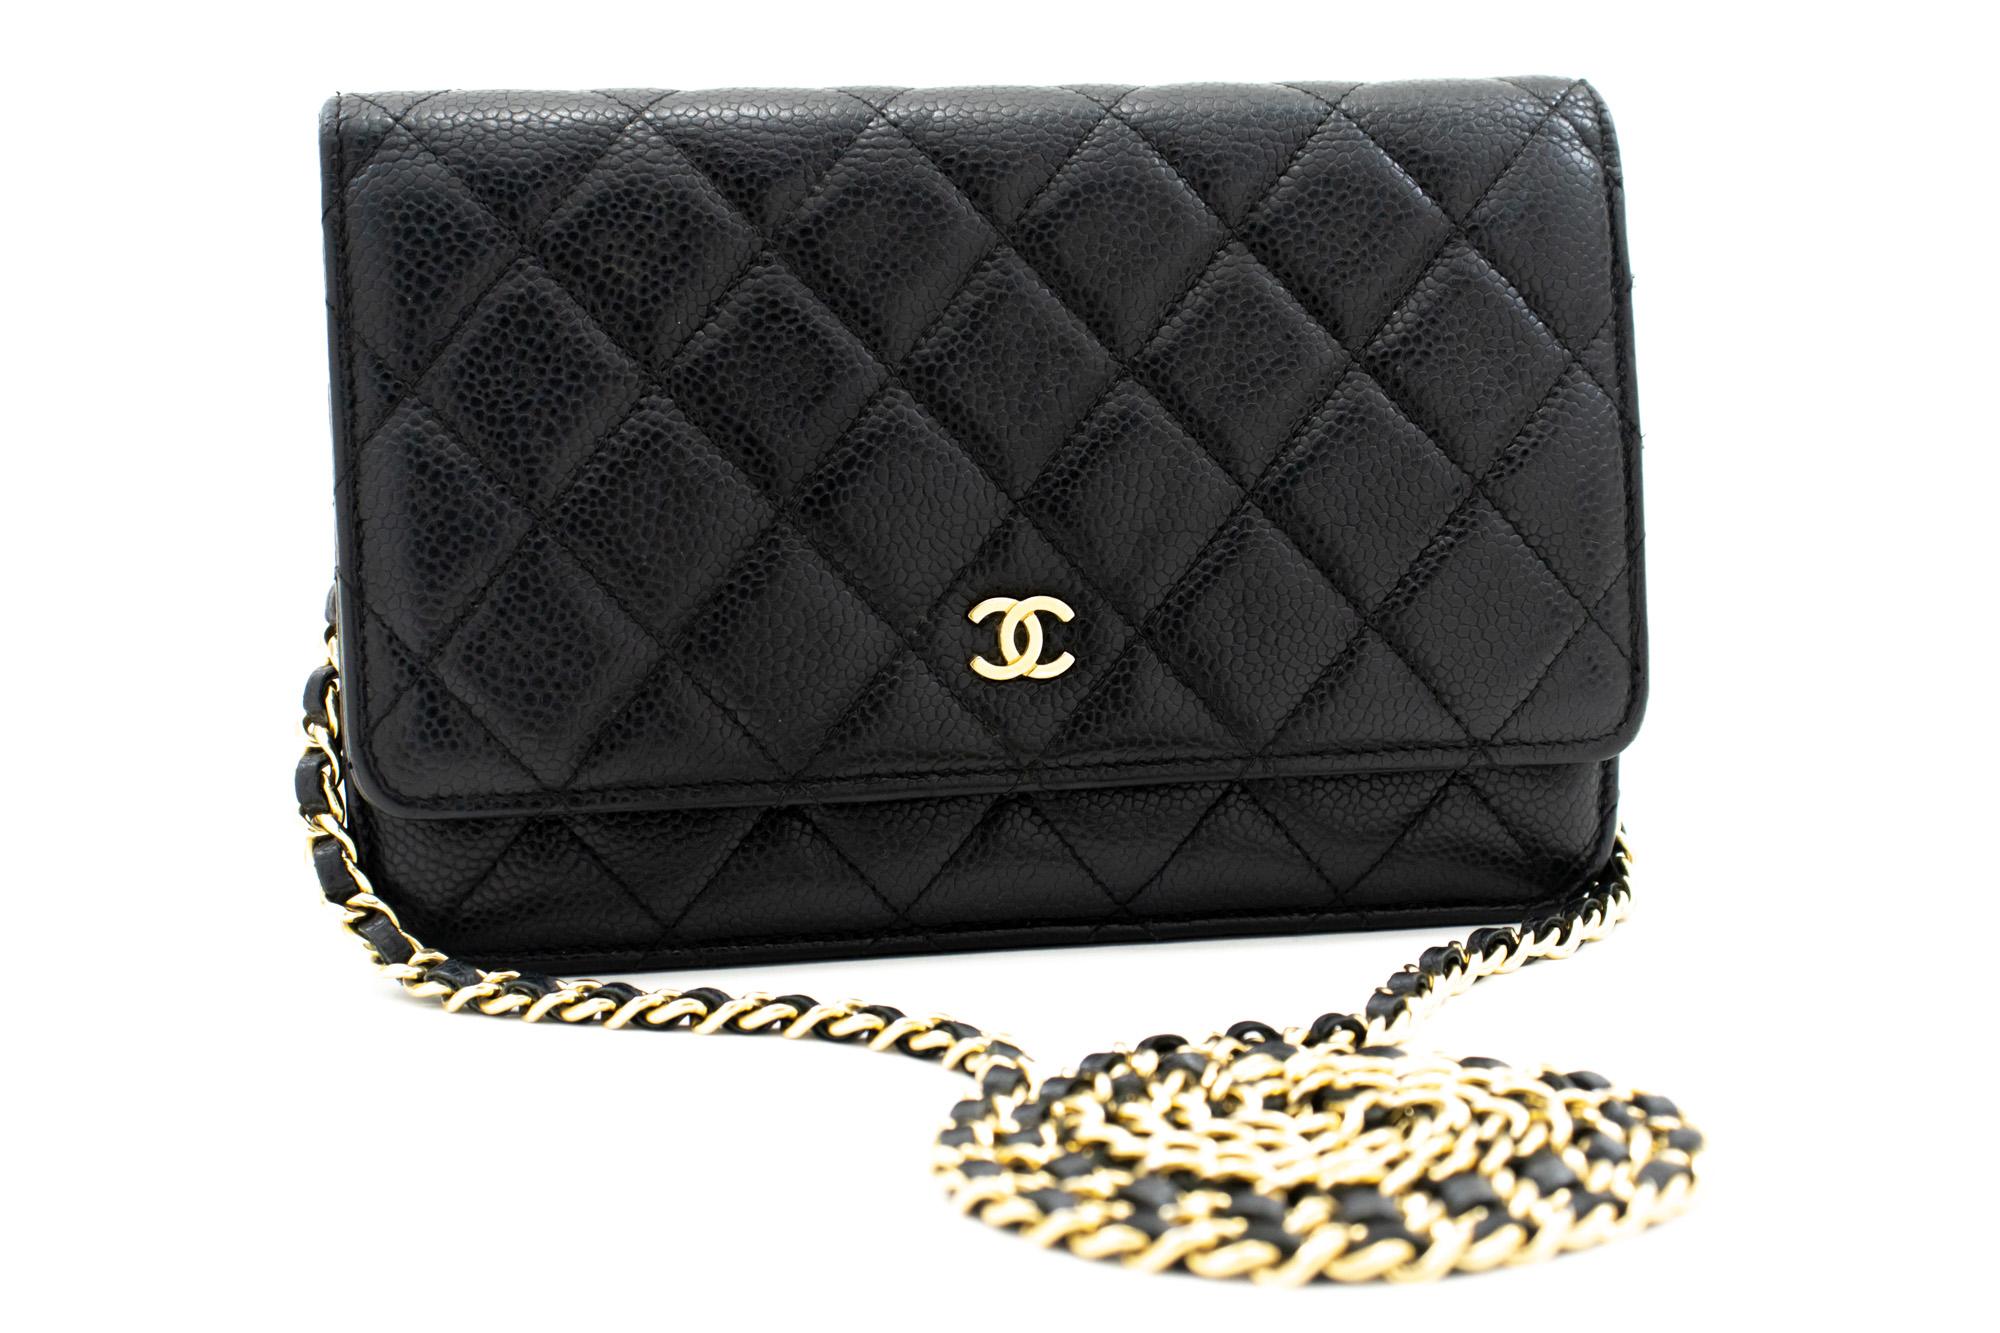 An authentic CHANEL Caviar Wallet On Chain WOC Black Shoulder Bag Crossbody. The color is Black. The outside material is Leather. The pattern is Solid. This item is Contemporary. The year of manufacture would be 2013.
Conditions & Ratings
Outside